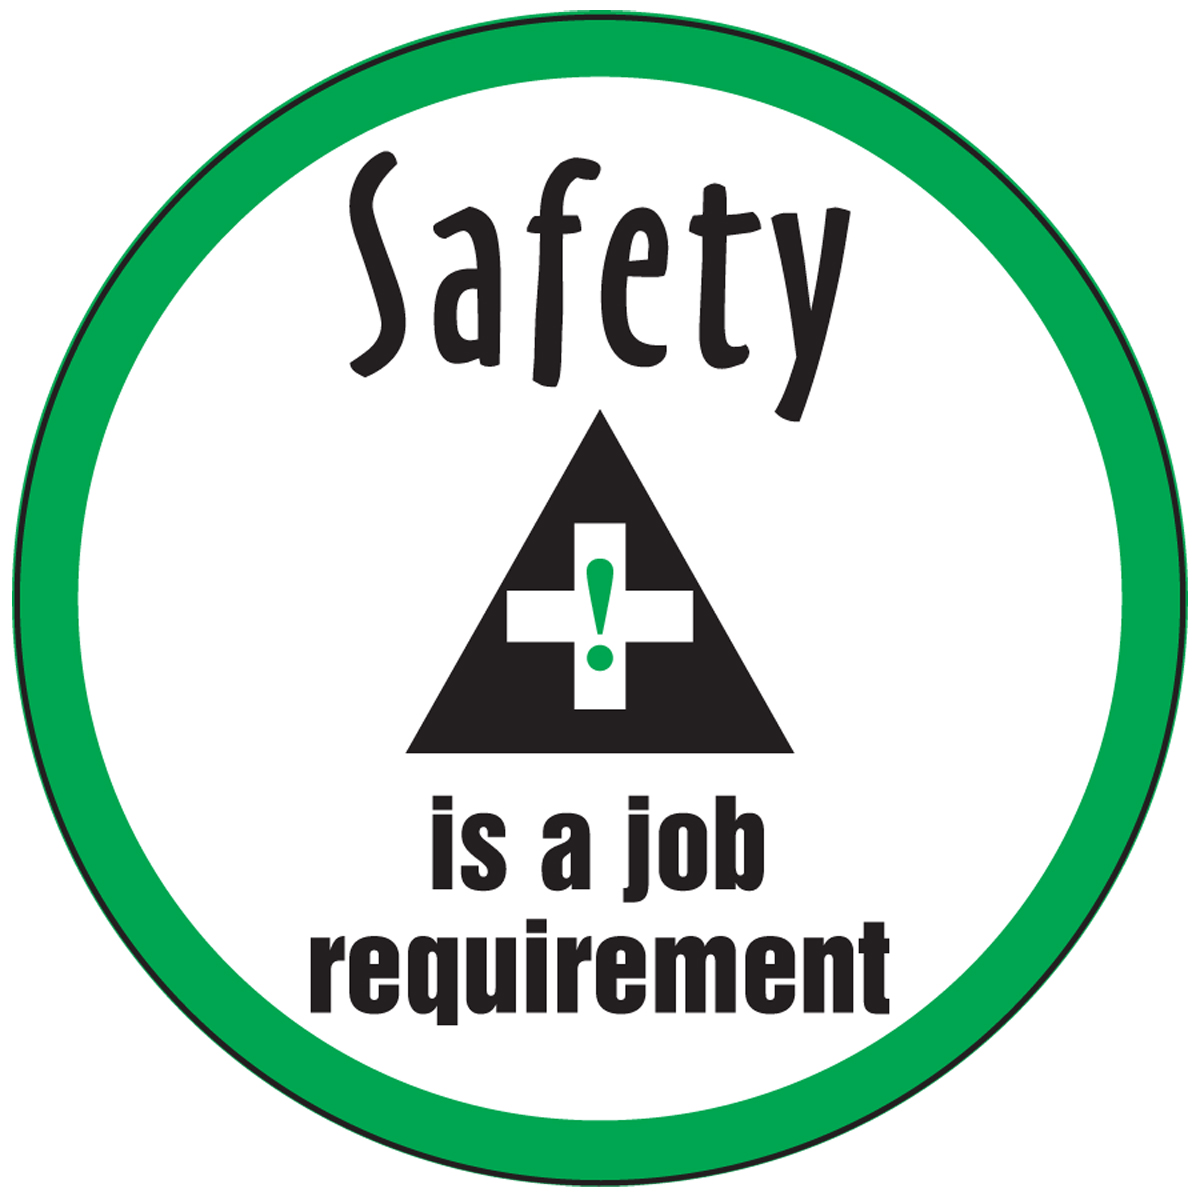 SAFETY IS A JOB REQUIREMENT